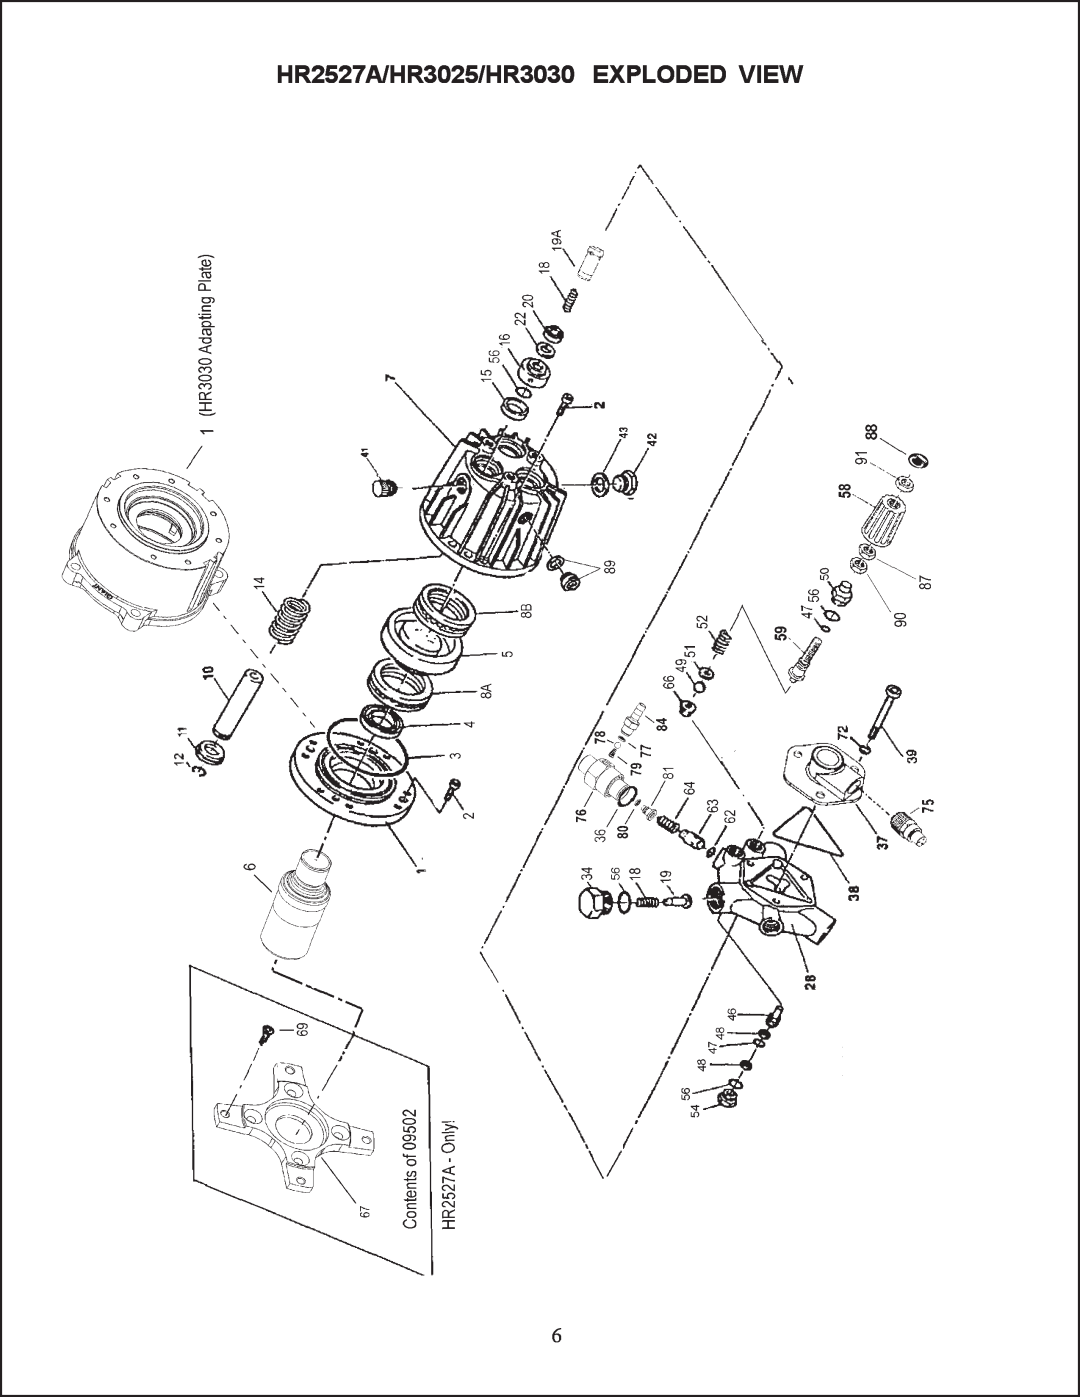 Giant operating instructions HR2527A/HR3025/HR3030 EXPLODED VIEW 